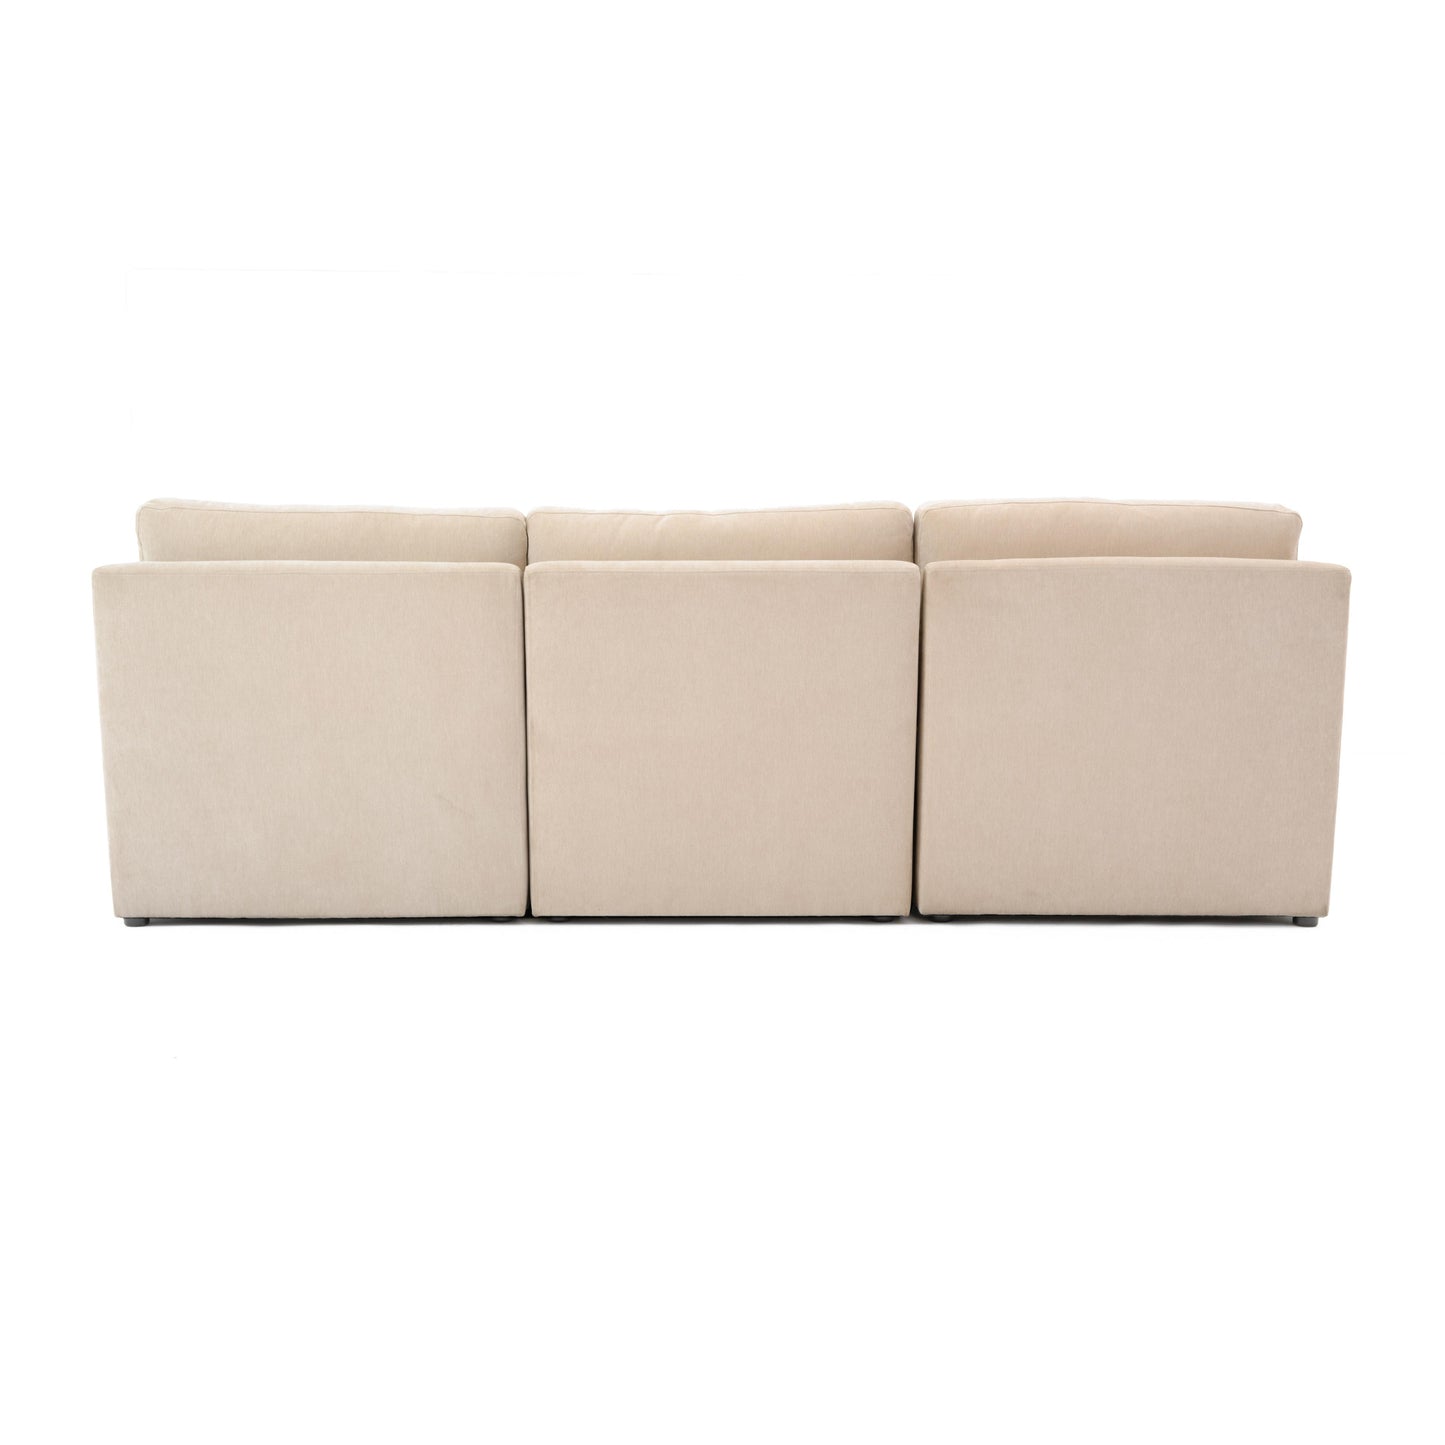 libre beige modular small chaise sectional